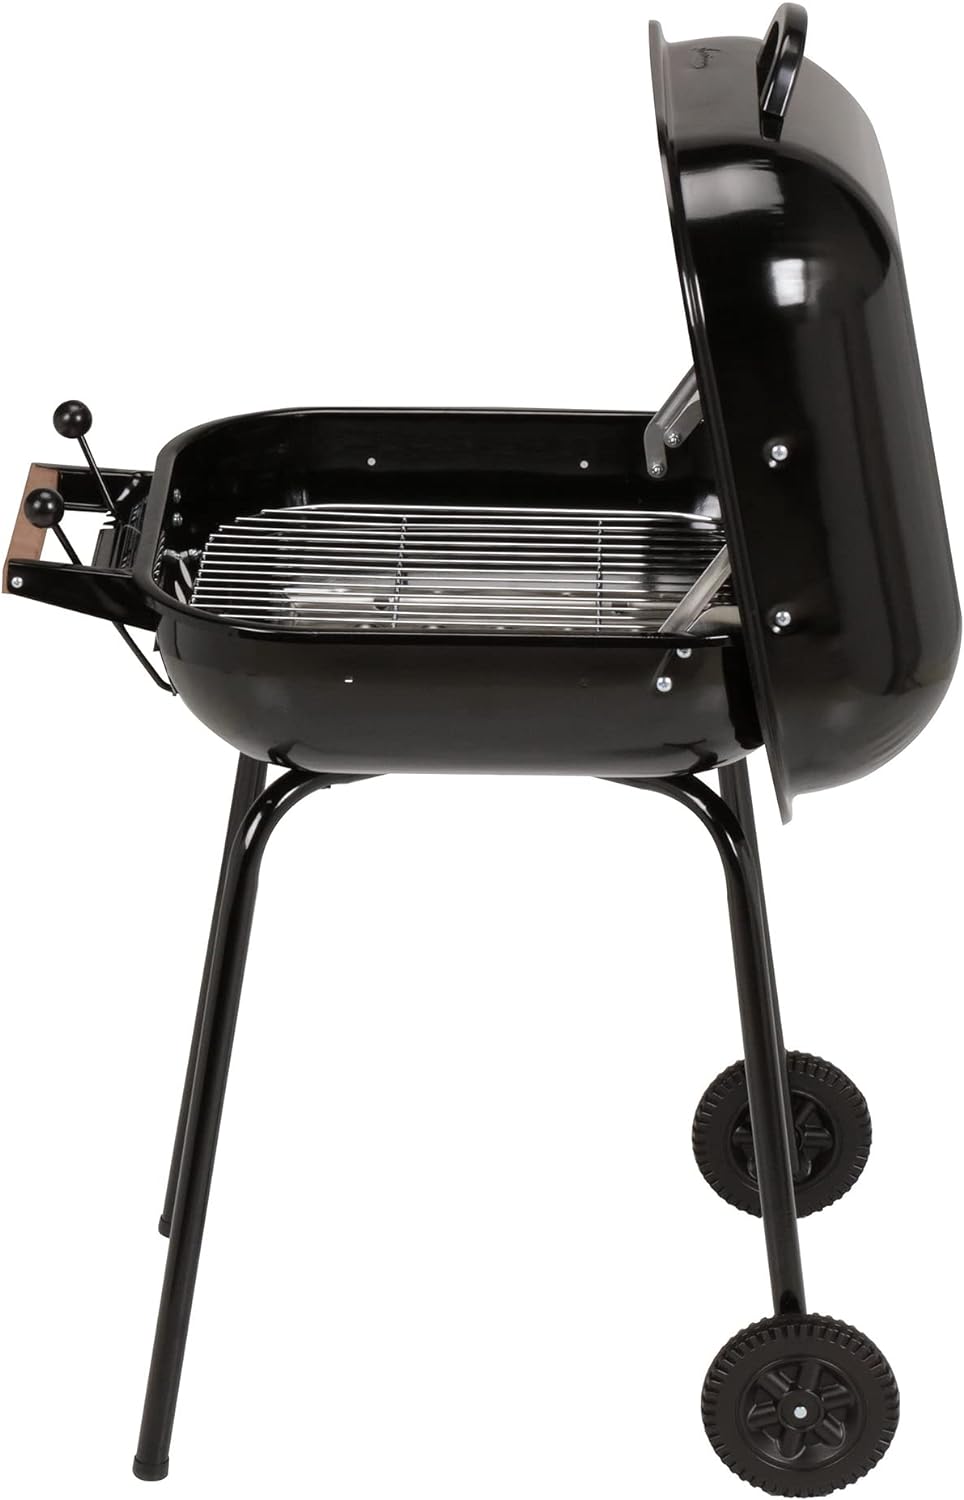 MECO Americana Swinger Portable Wheeled Outdoor Camping Tailgating Charcoal Grill with Adjustable Grid, Air Vents, Side Tables,  Bottom Shelf, Black